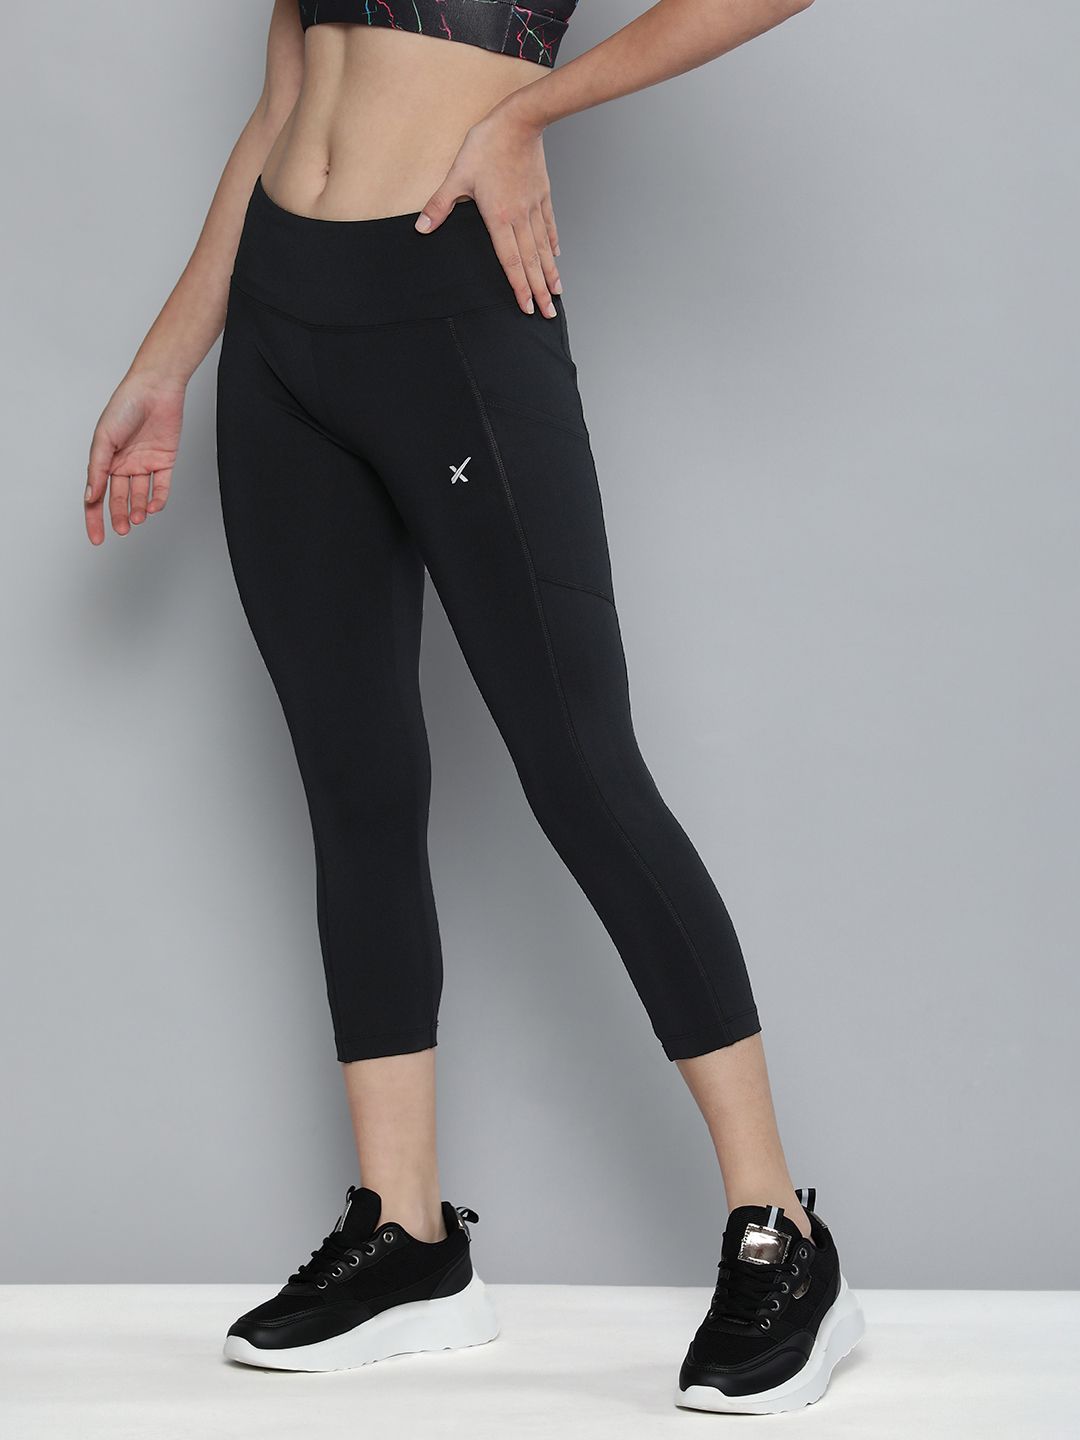 HRX By Hrithik Roshan Women Black Rapid-Dry Yoga Tights Price in India